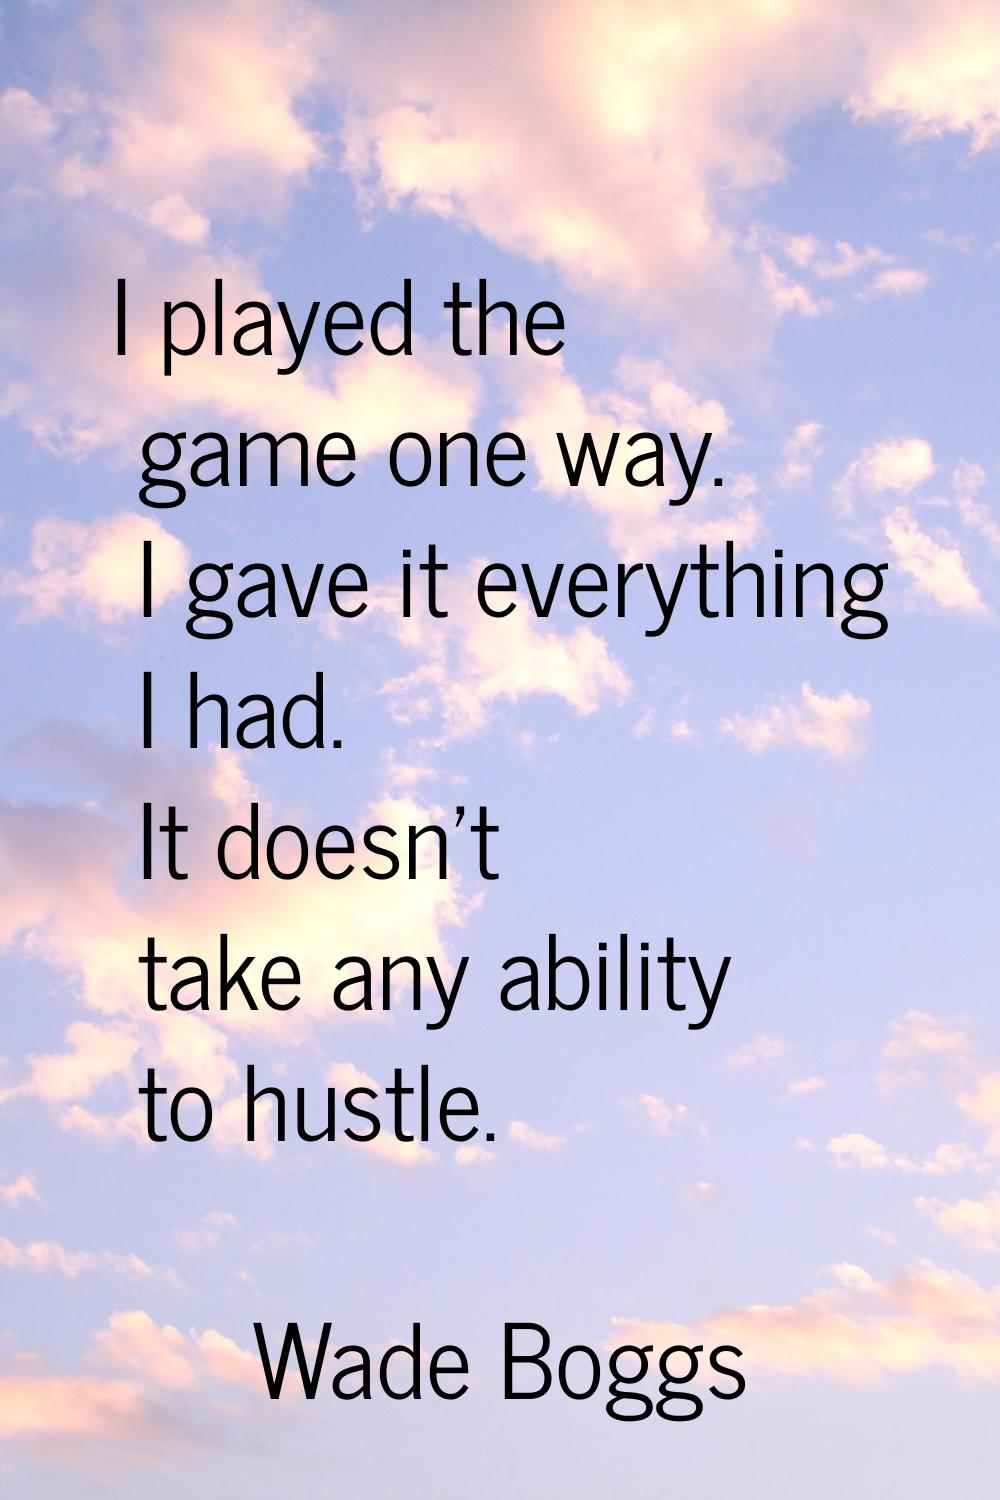 I played the game one way. I gave it everything I had. It doesn't take any ability to hustle.